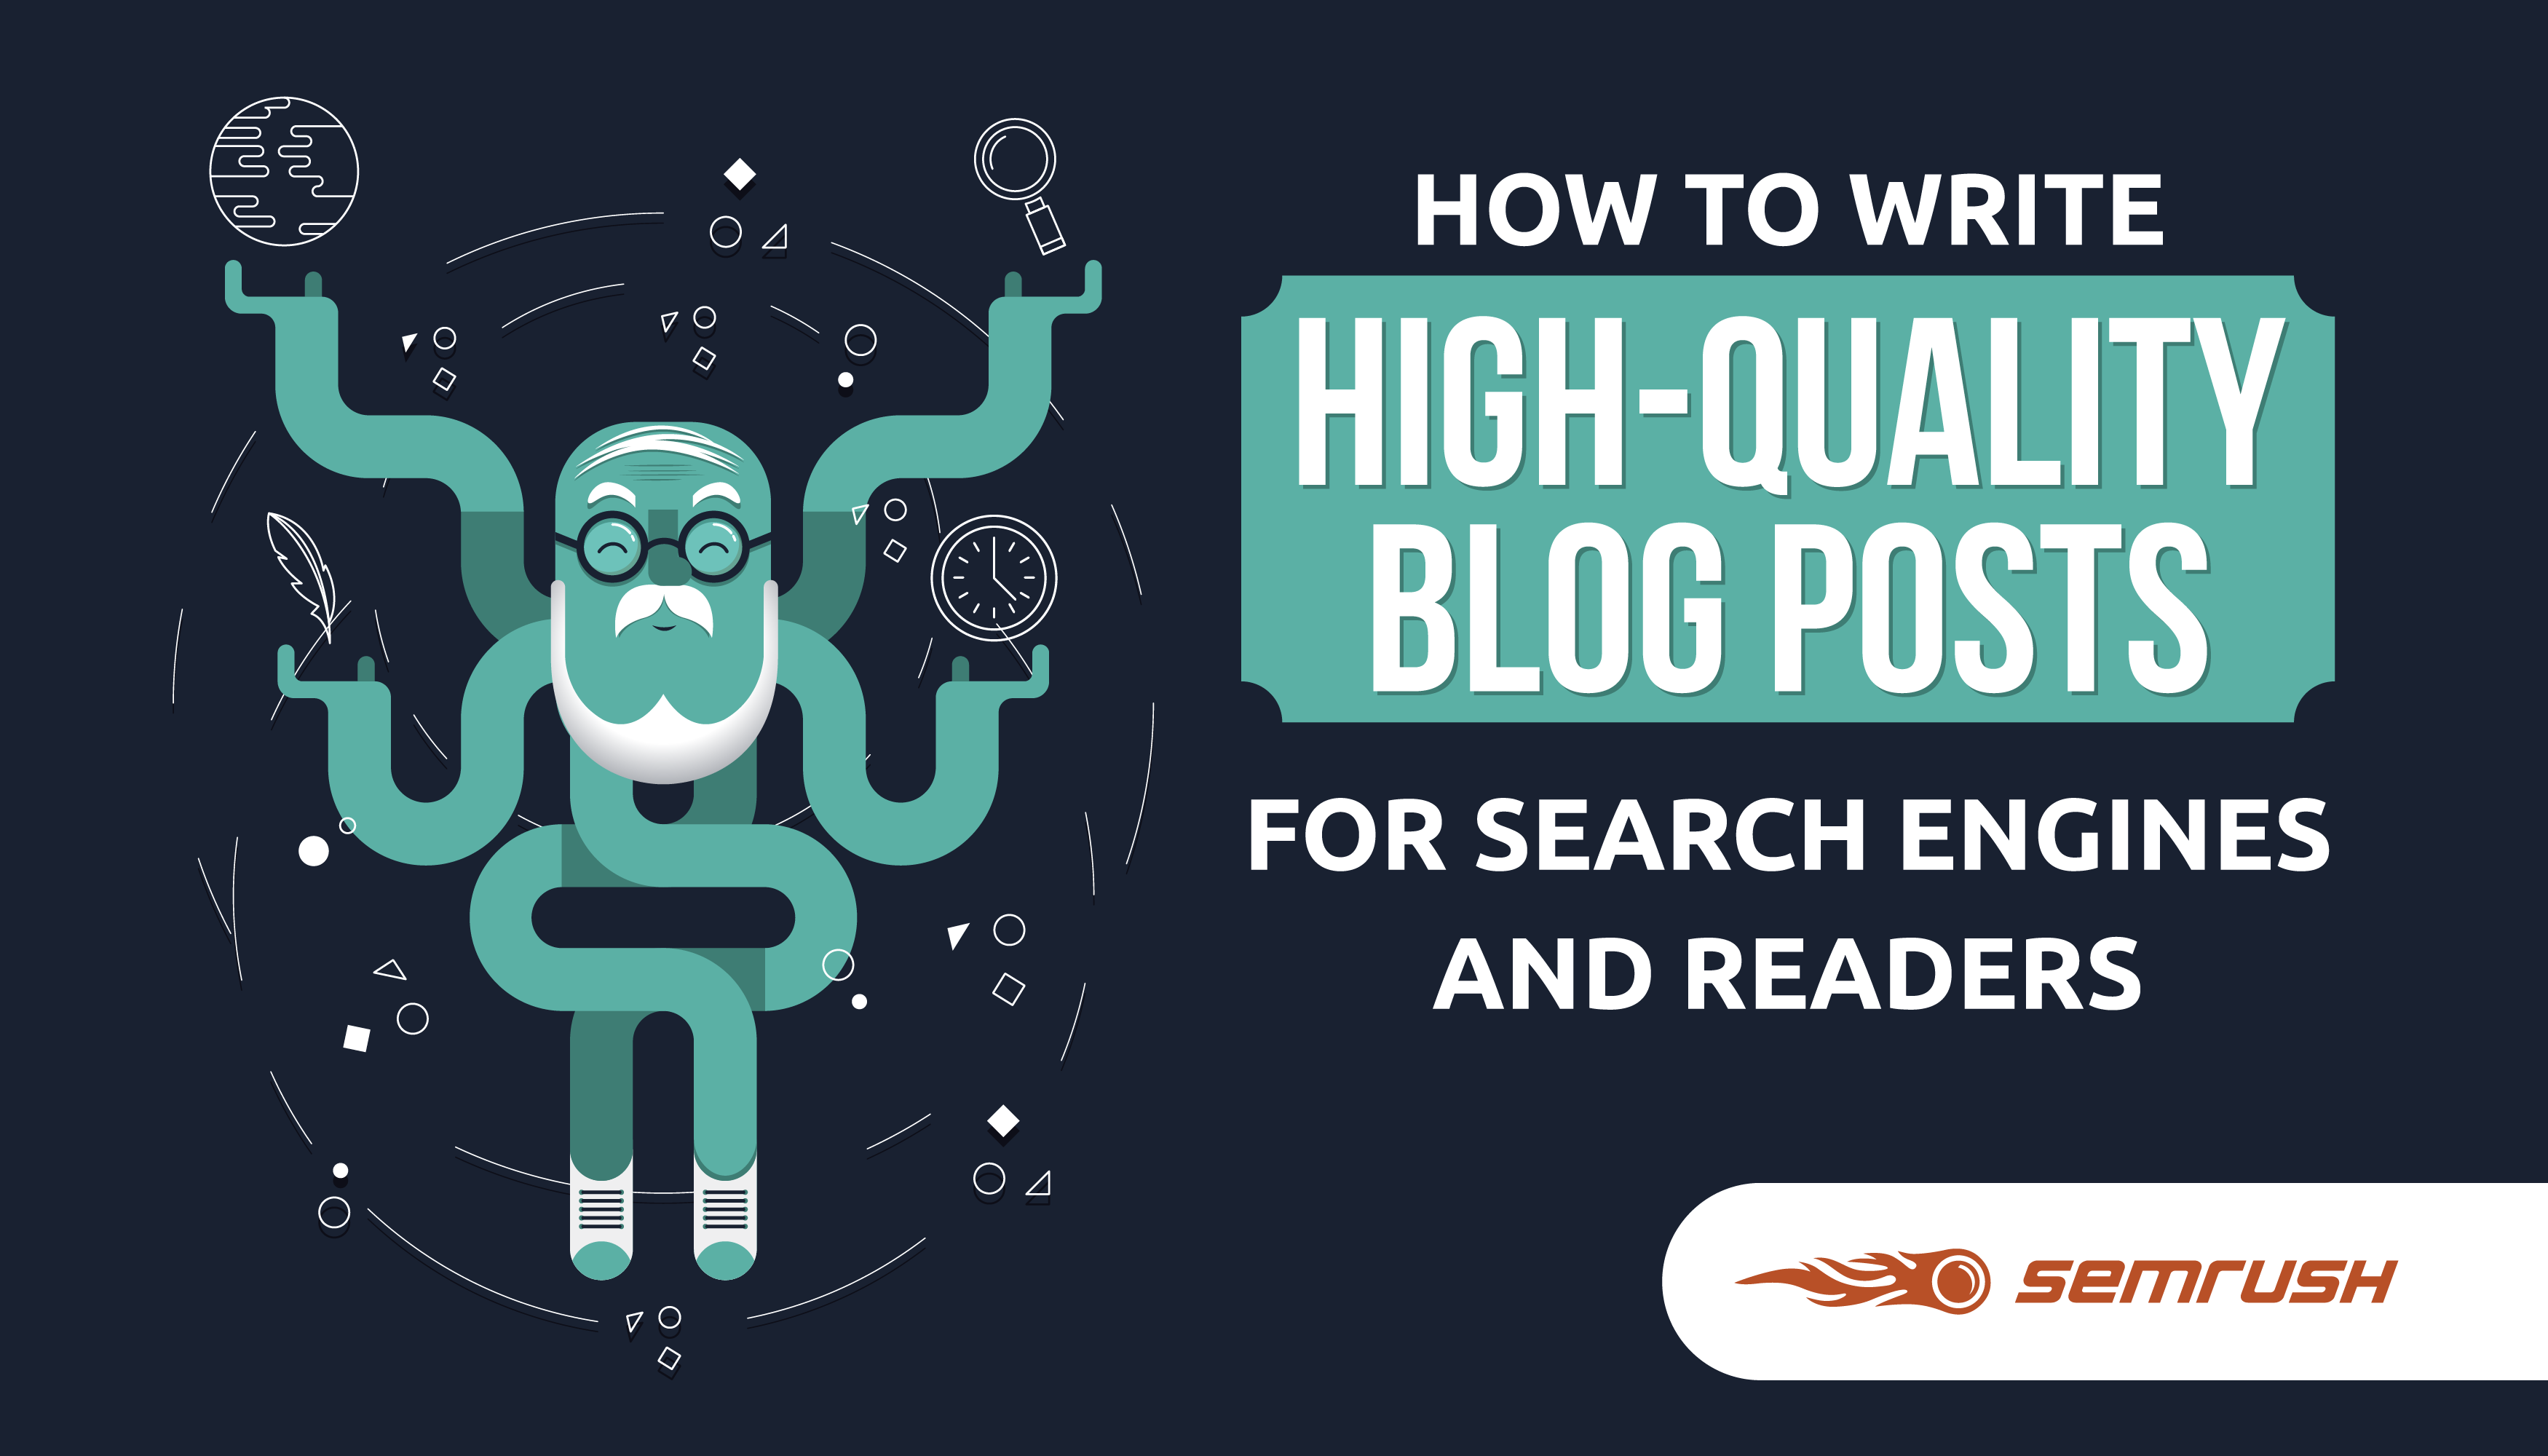 How To Write High-Quality Blog Posts